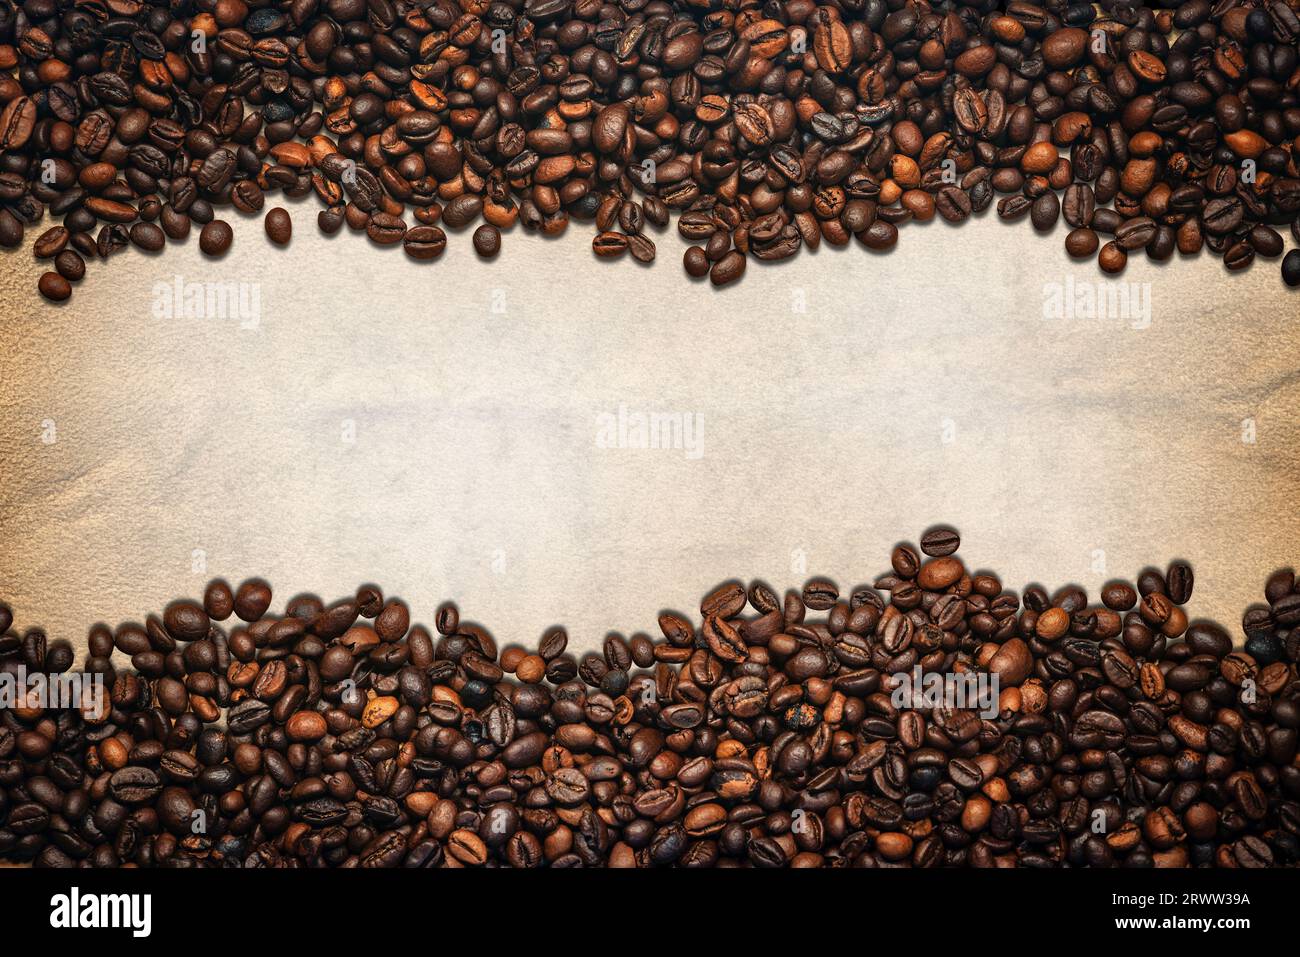 Large group of roasted coffee beans on a blank parchment with copy space. Horizontal composition, template, photography. Stock Photo